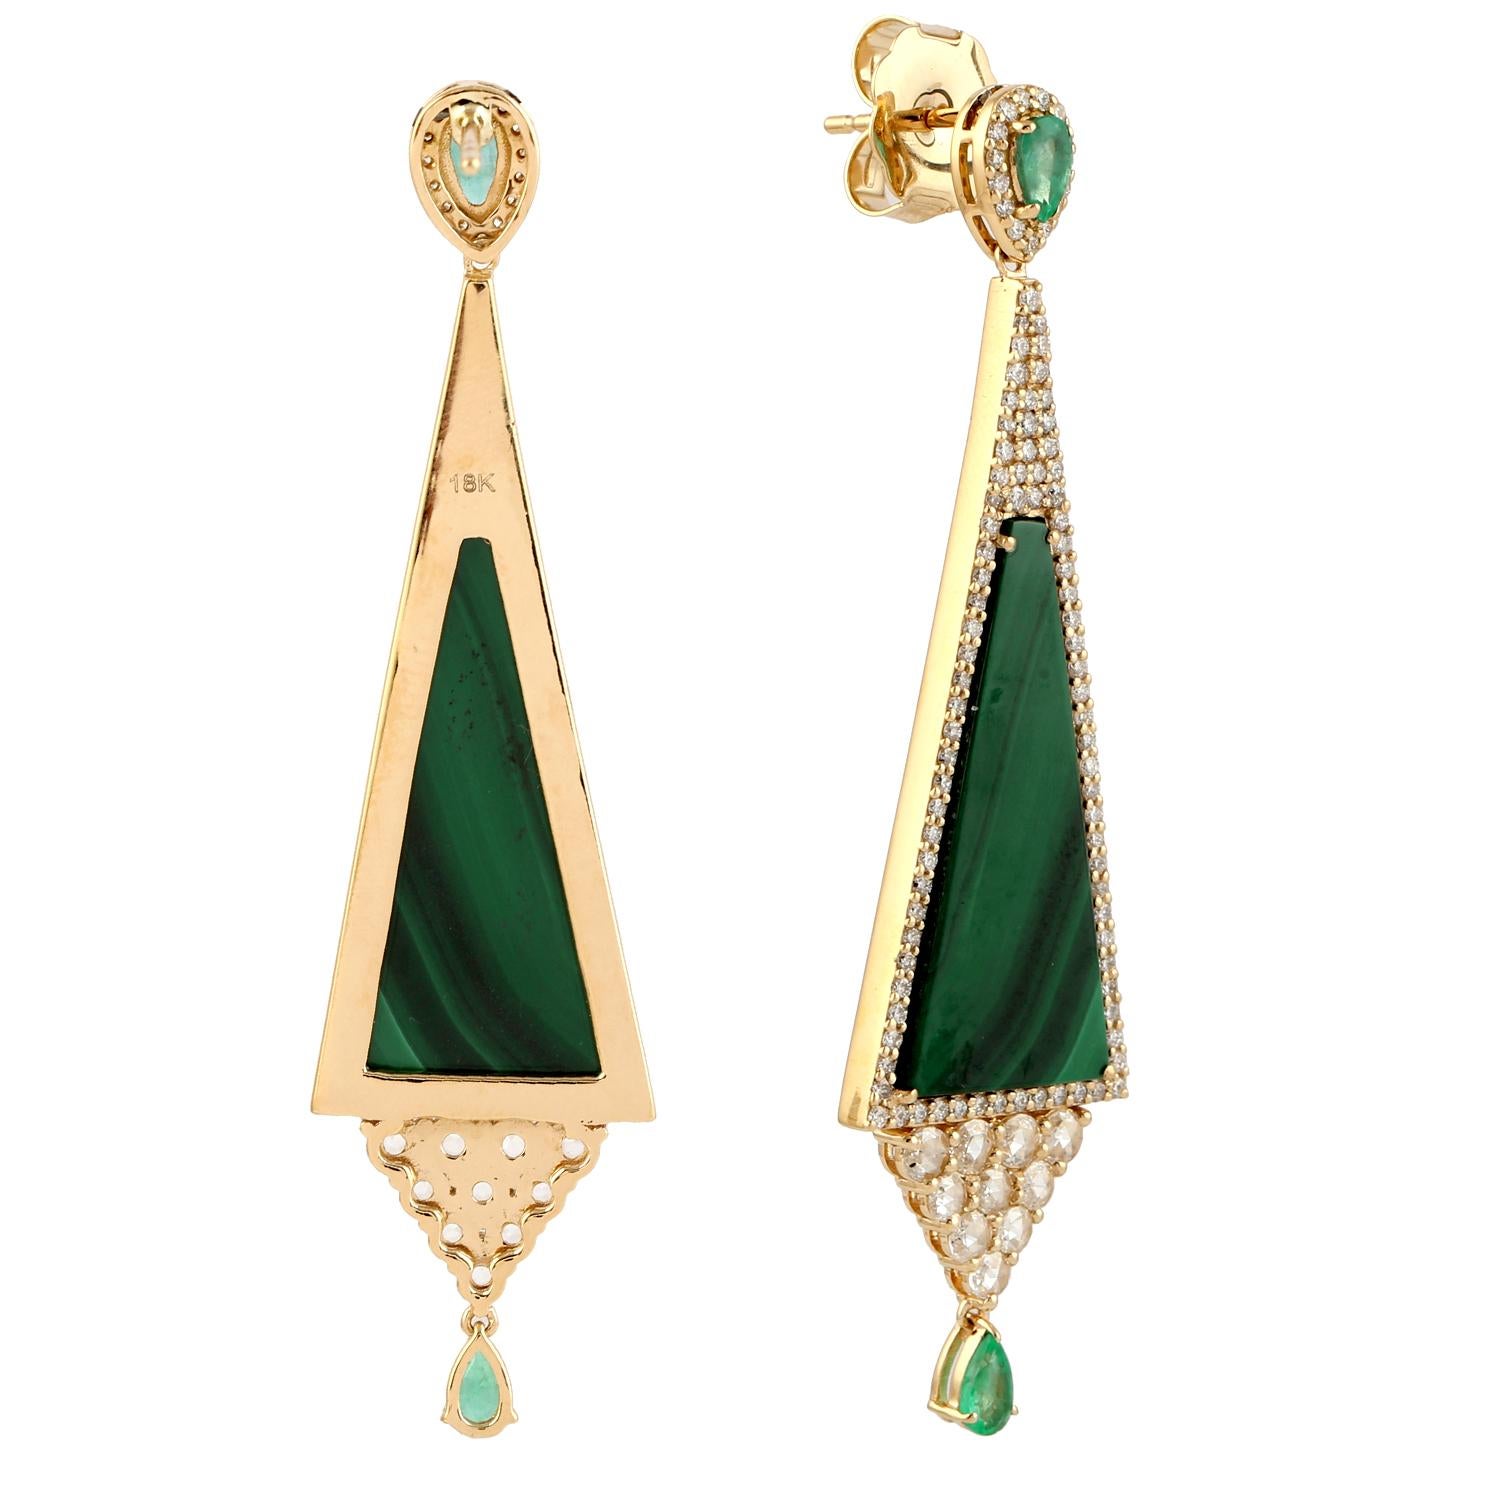 Handcrafted from 14-karat gold, these stunning earrings are set with 16.46 carats Malachite, .86 carats emerald and 1.48 carats of glimmering diamonds. 

FOLLOW  MEGHNA JEWELS storefront to view the latest collection & exclusive pieces.  Meghna